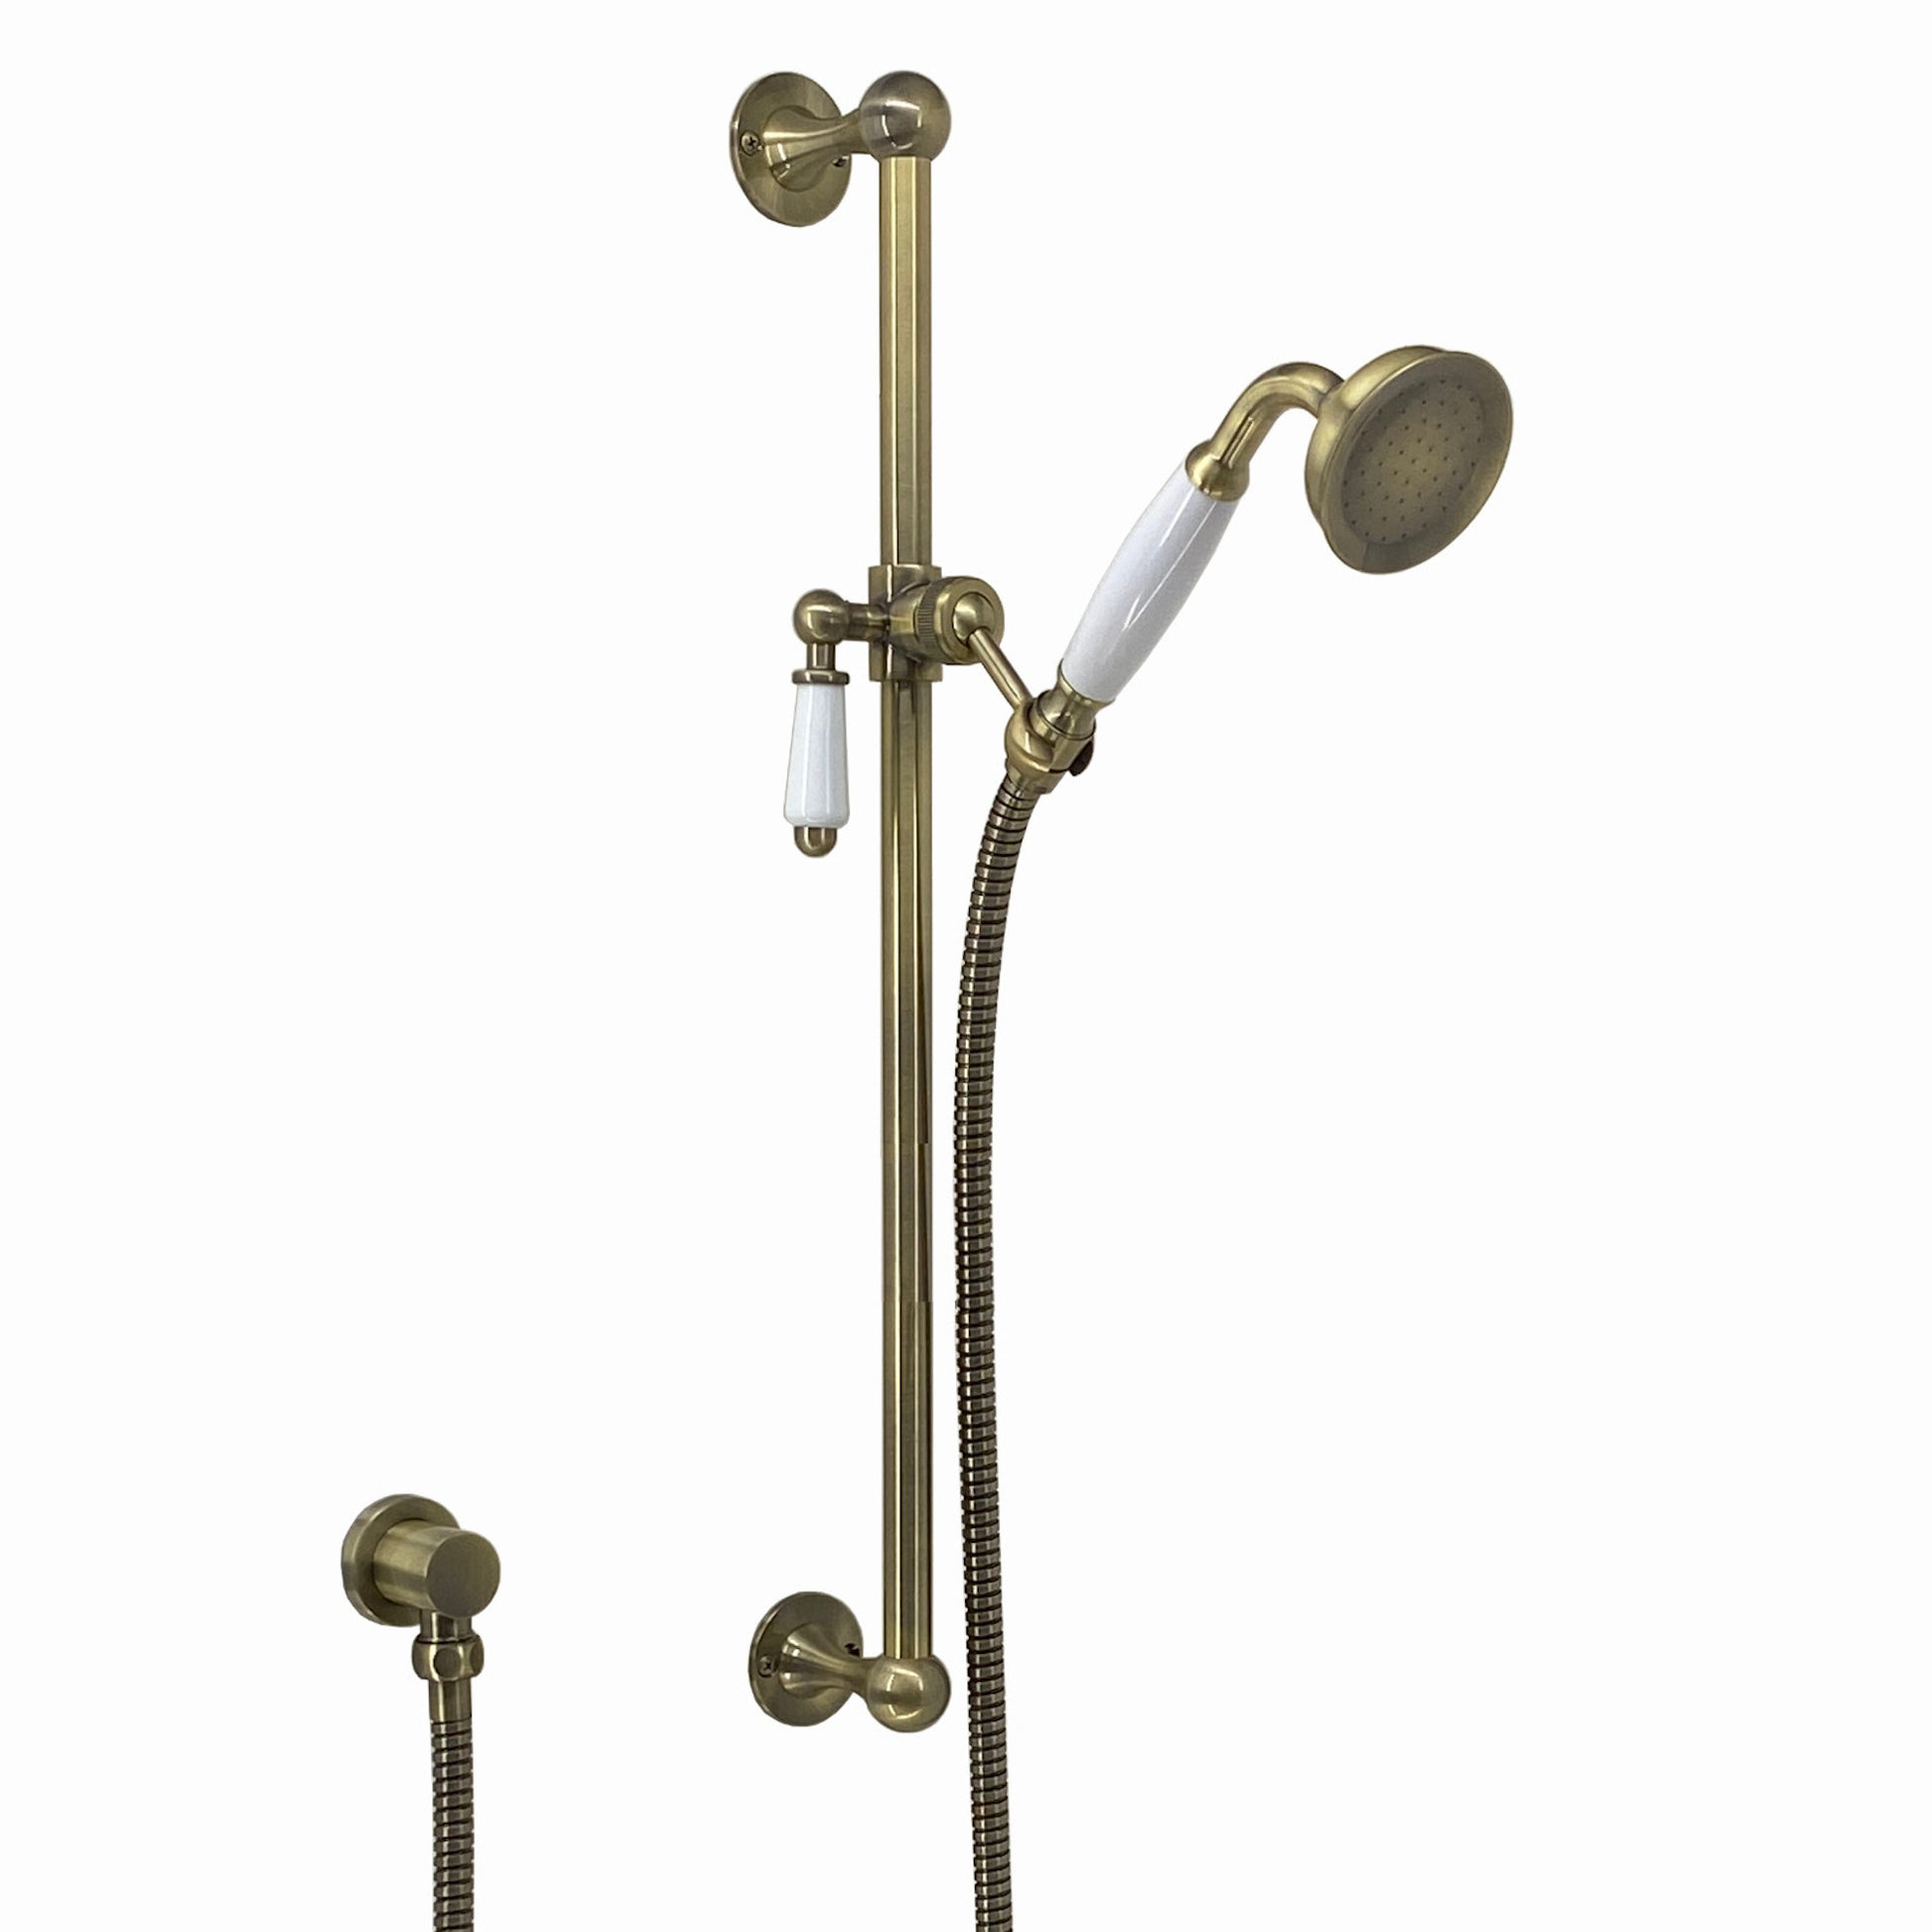 Traditional Shower Slider Rail Kit Lever Design With Brass White Ceramic Handset, Hose And Wall Elbow Outlet - Antique Bronze - Showers